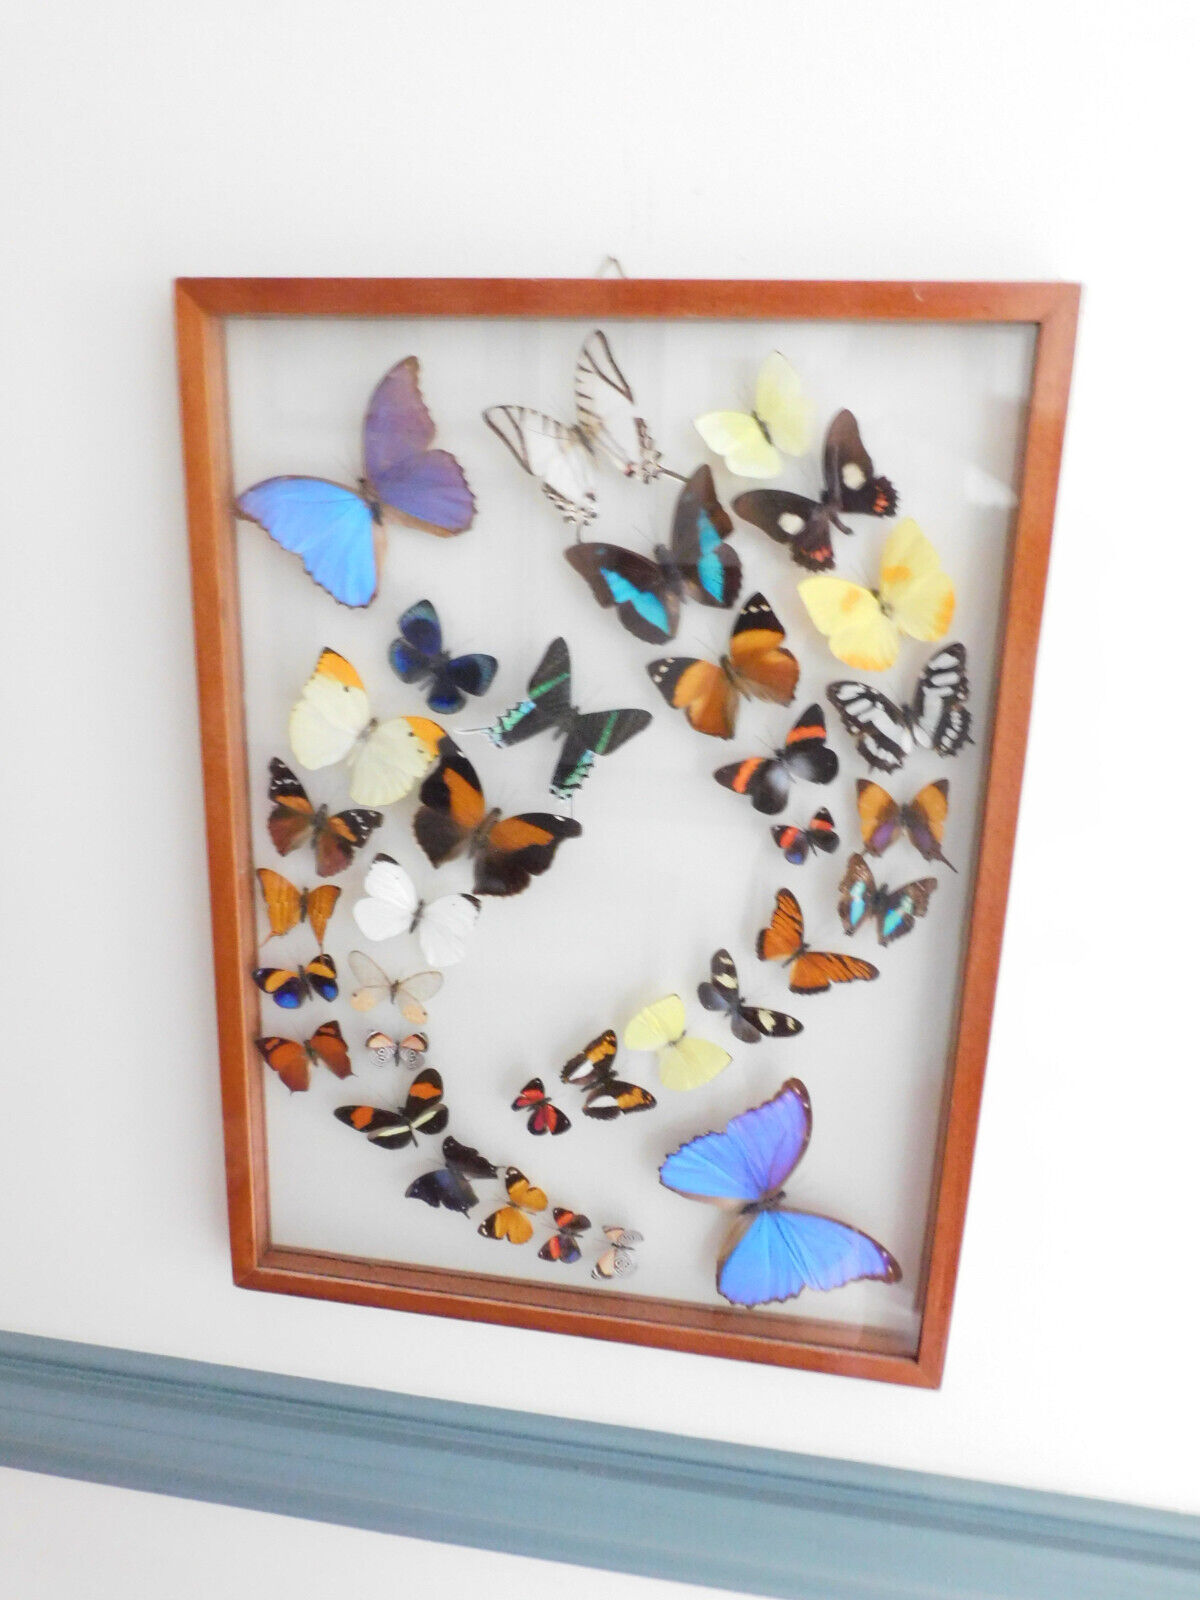 LARGE MOUNTED BUTTERFLY DISPLAY  33 BUTTERFLIES